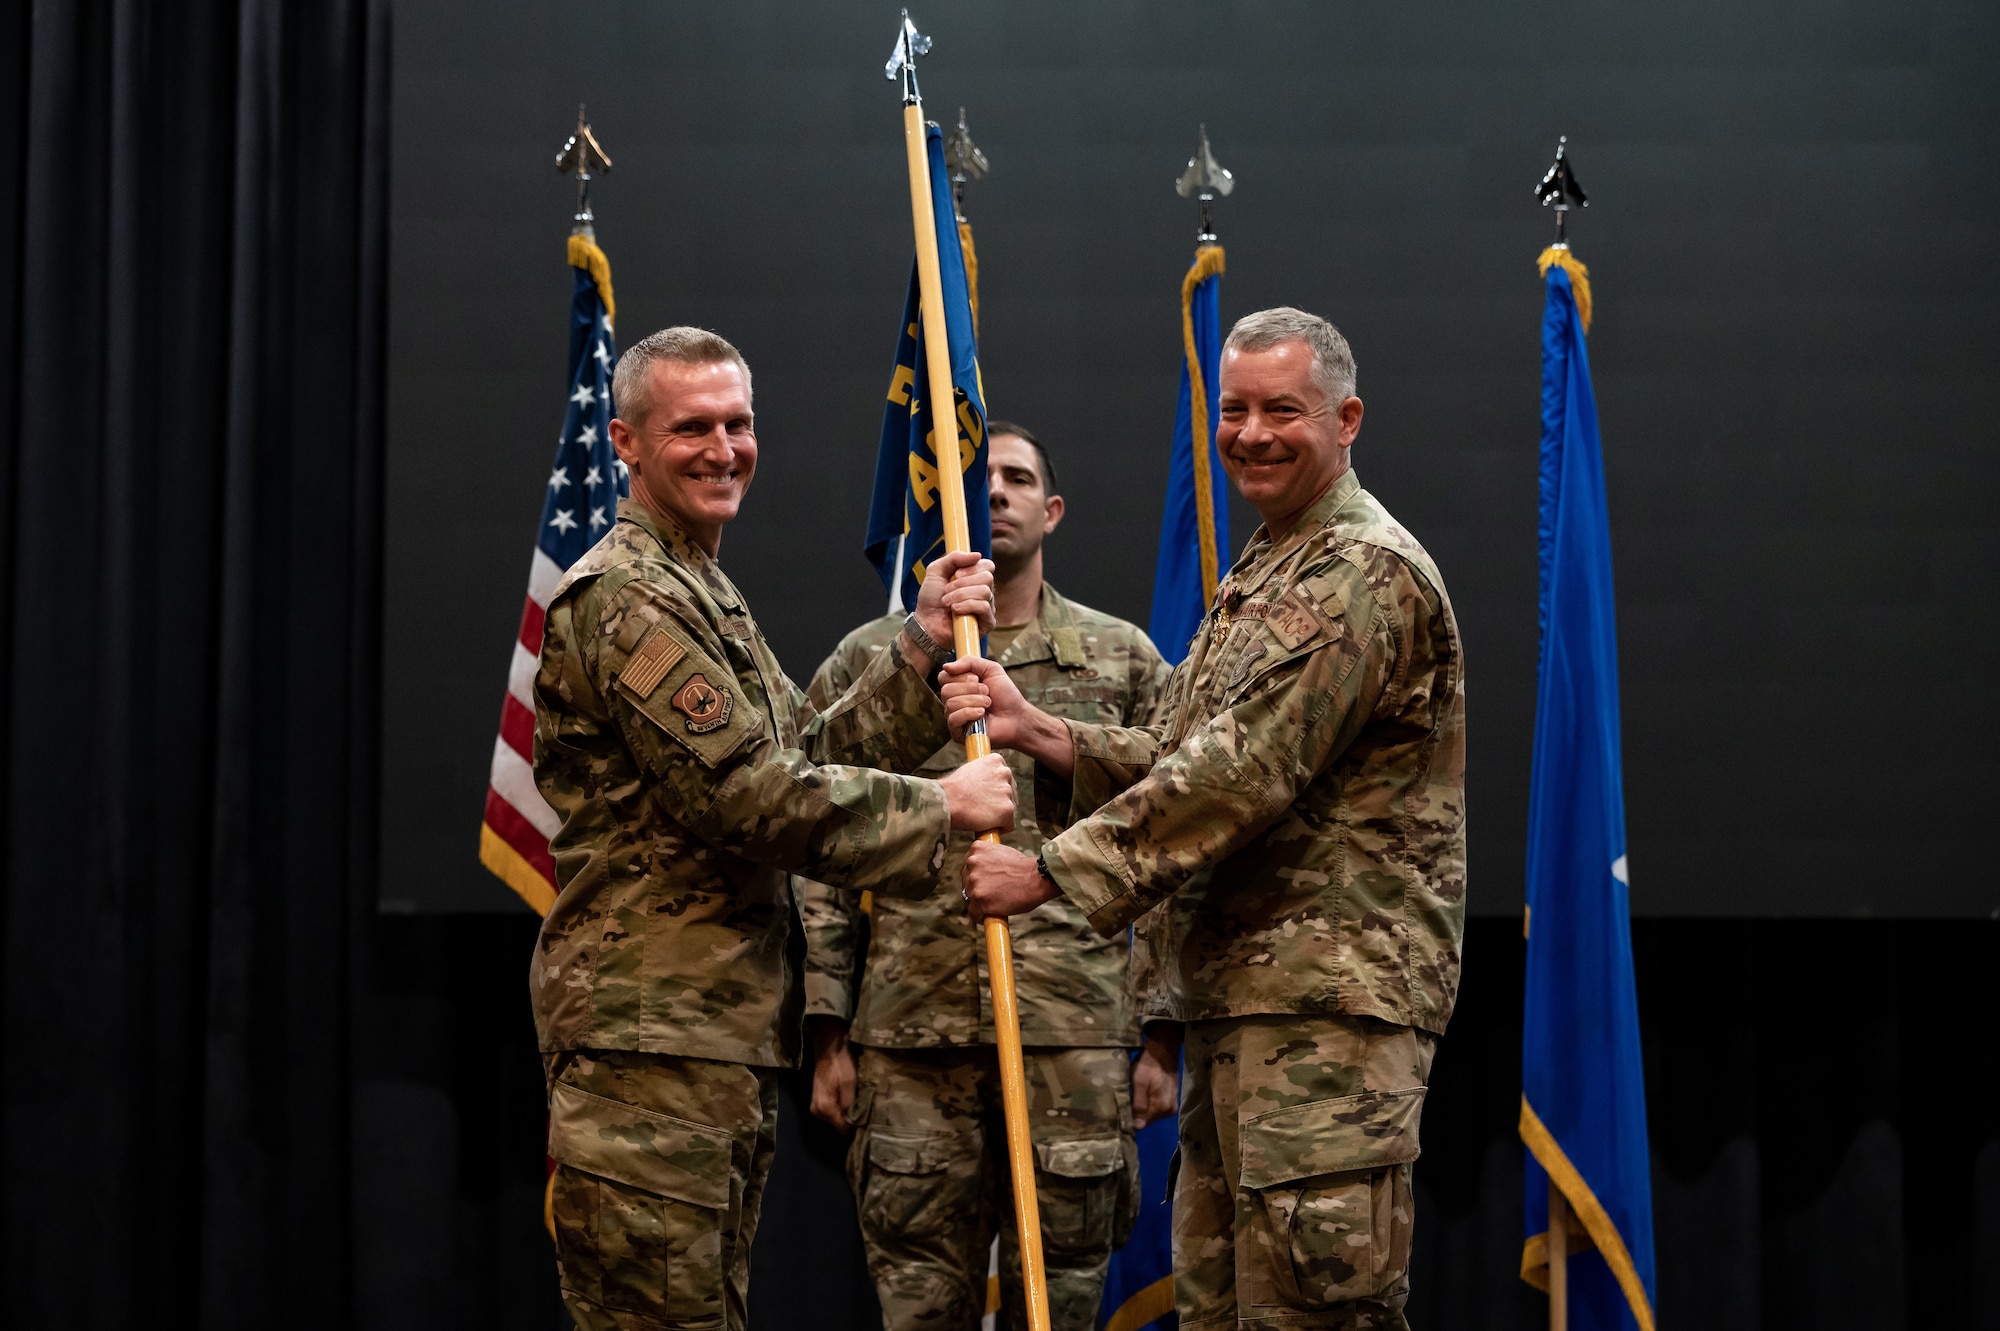 Brig. Gen. Jason Rueschhoff, 7th Air Force deputy commander, left, receives the ceremonial guidon from Col. William Edmunds, 607th Air Support Operations Group outbound commander, at Osan Air Base, Republic of Korea, June 22, 2021. This act marks the official end of Edmunds tenure as commander of the 607th ASOG. (U.S. Air Force photo by Tech. Sgt. Nicholas Alder)